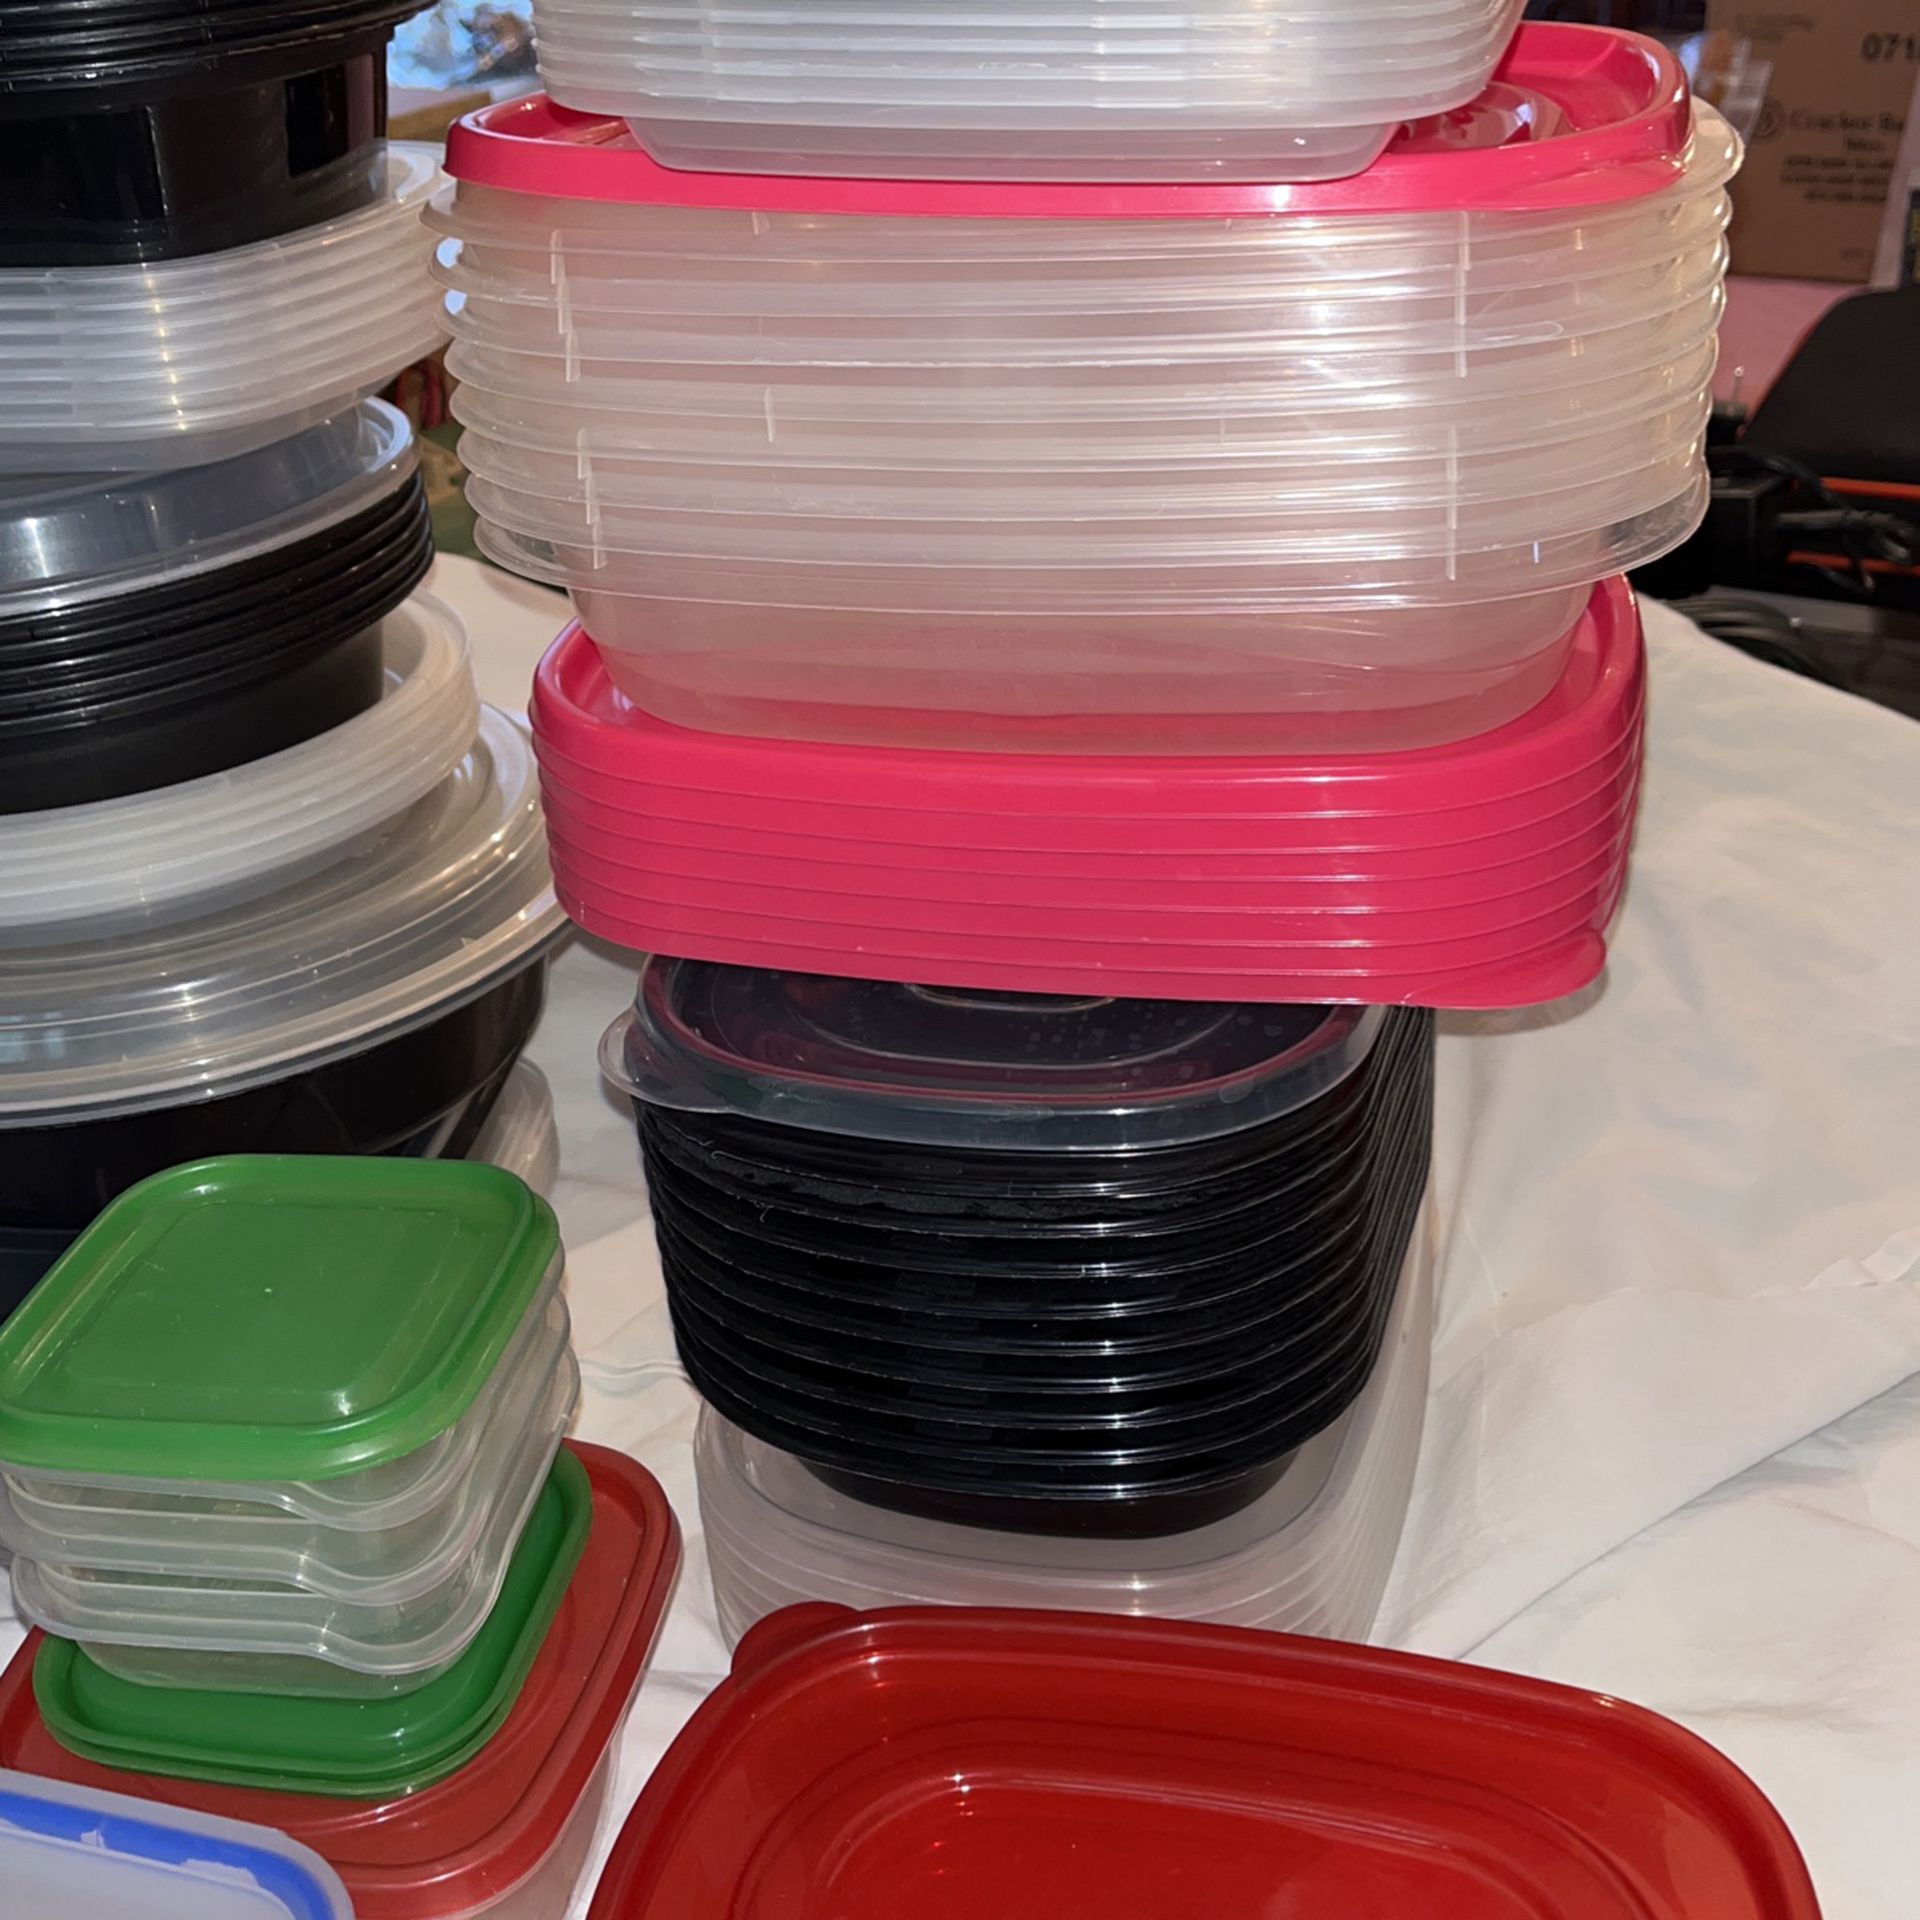 About 50 Rubbermaid snapware gladware And Betty Crocker Food Storage  Containers for Sale in Ronkonkoma, NY - OfferUp